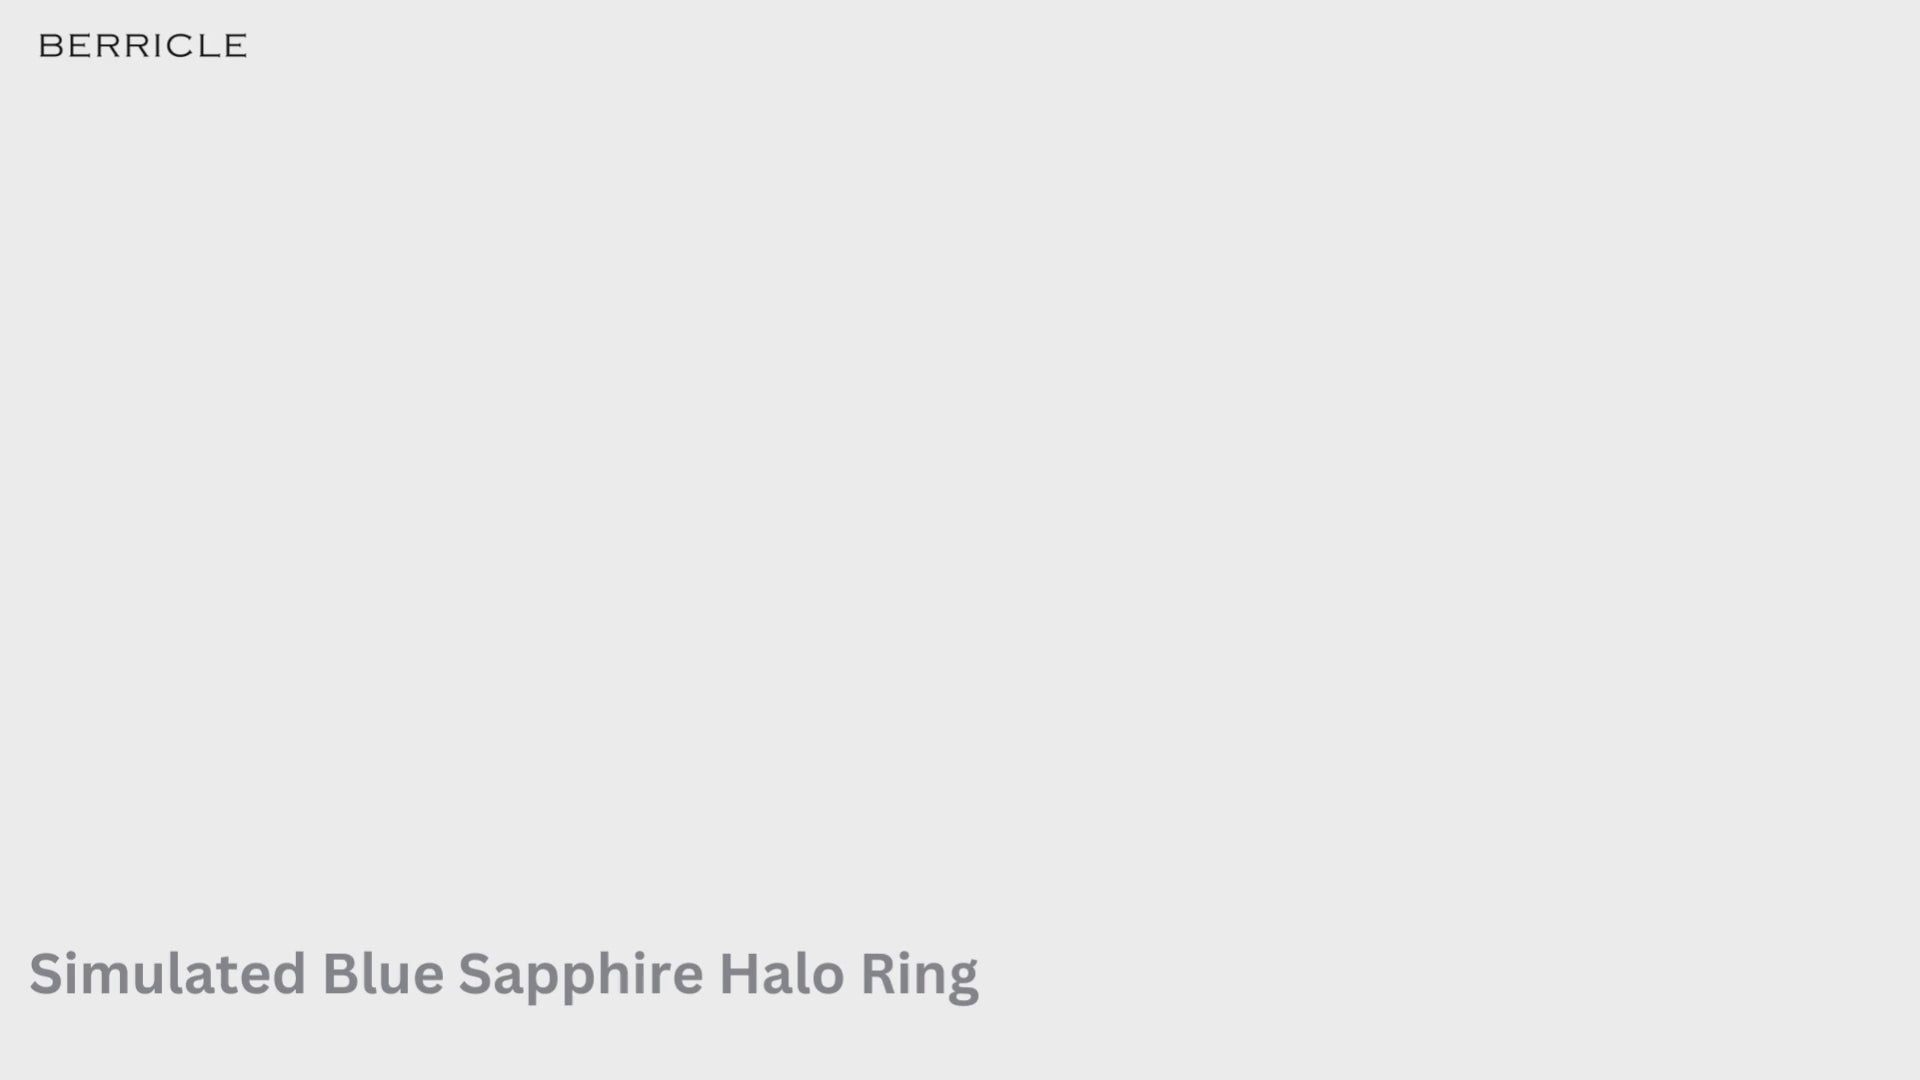 Video Contains Halo Milgrain Simulated Blue Sapphire Round CZ Ring in Sterling Silver. Style Number R1853-01